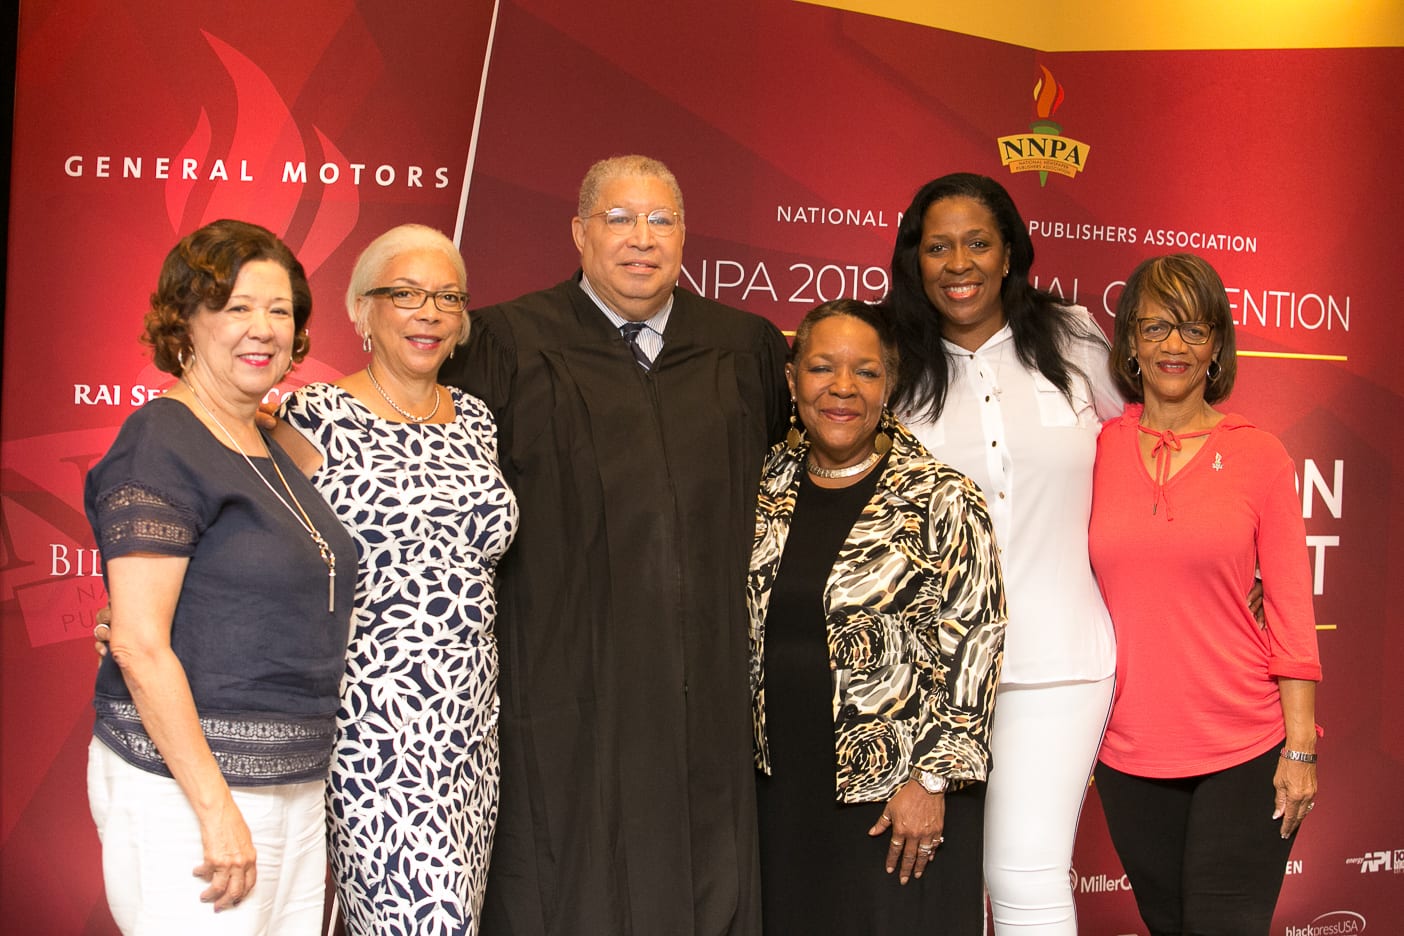 Newly elected NNPA Board Members following the ceremonial swearing in of new officers. (Pictured left to right: Treasurer Brenda Andrews, Publisher of the New Journal and Guide; 1st Vice Chair Janis Ware, Publisher of The Atlanta Voice; Judge Tyrone K. Yates, who officiated the swearing in of officers; 2nd Vice Chair, Fran Farrer, Publisher of The County News; Chair of the NNPA, Karen Carter Richards, Publisher of the Houston Forward Times; Secretary: Jackie Hampton, Publisher of The Mississippi Link